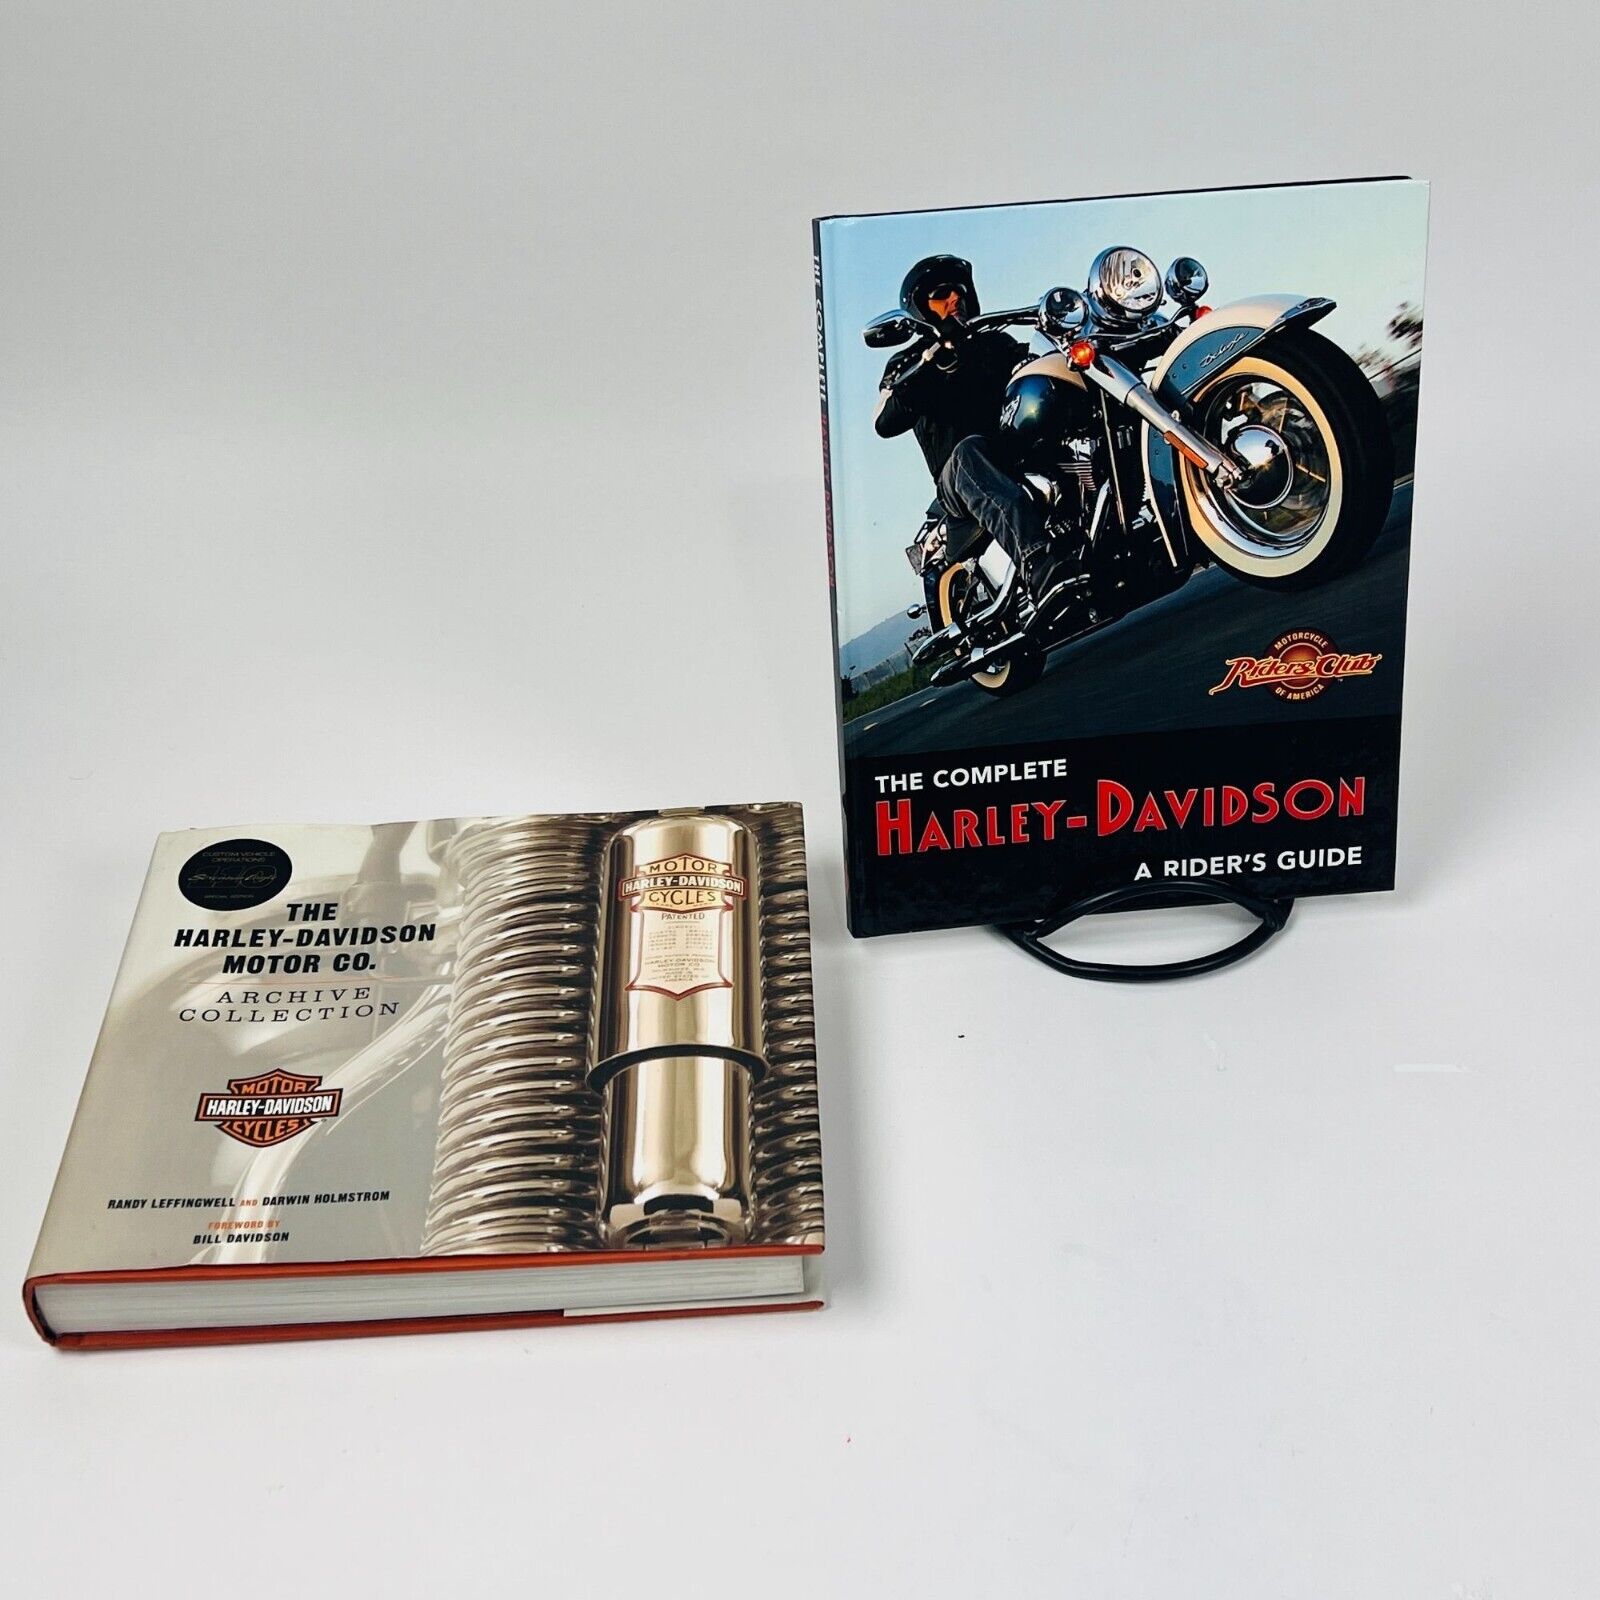 Harley-Davidson 2 Motorcycle books The Riders Guide & Harley-Davidson Motor Co